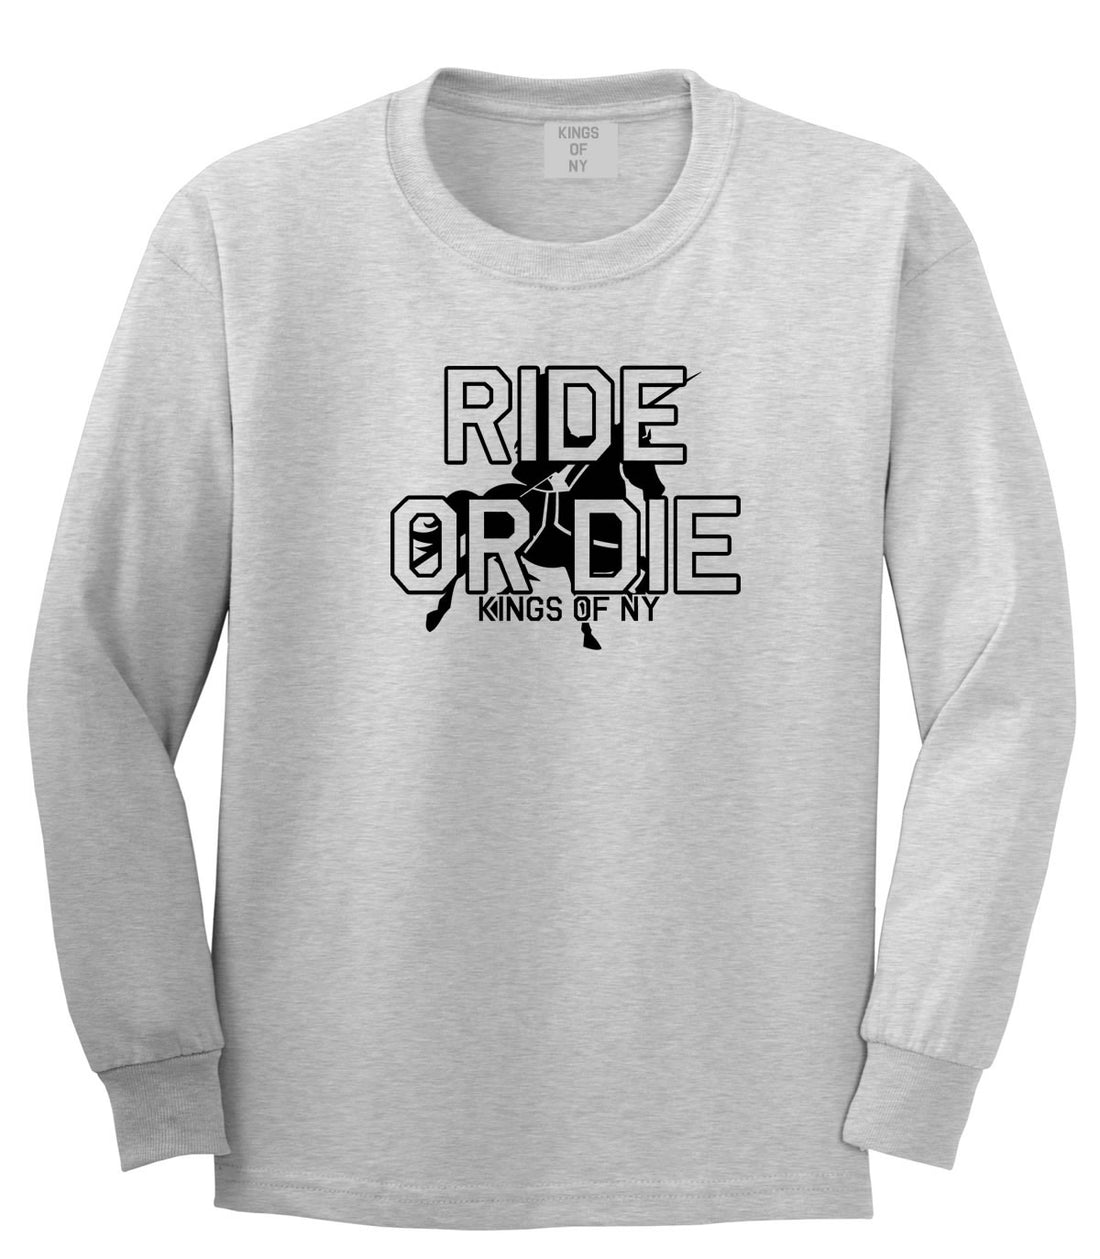 Ride Or Die Horse Rider Long Sleeve T-Shirt in Grey by Kings Of NY